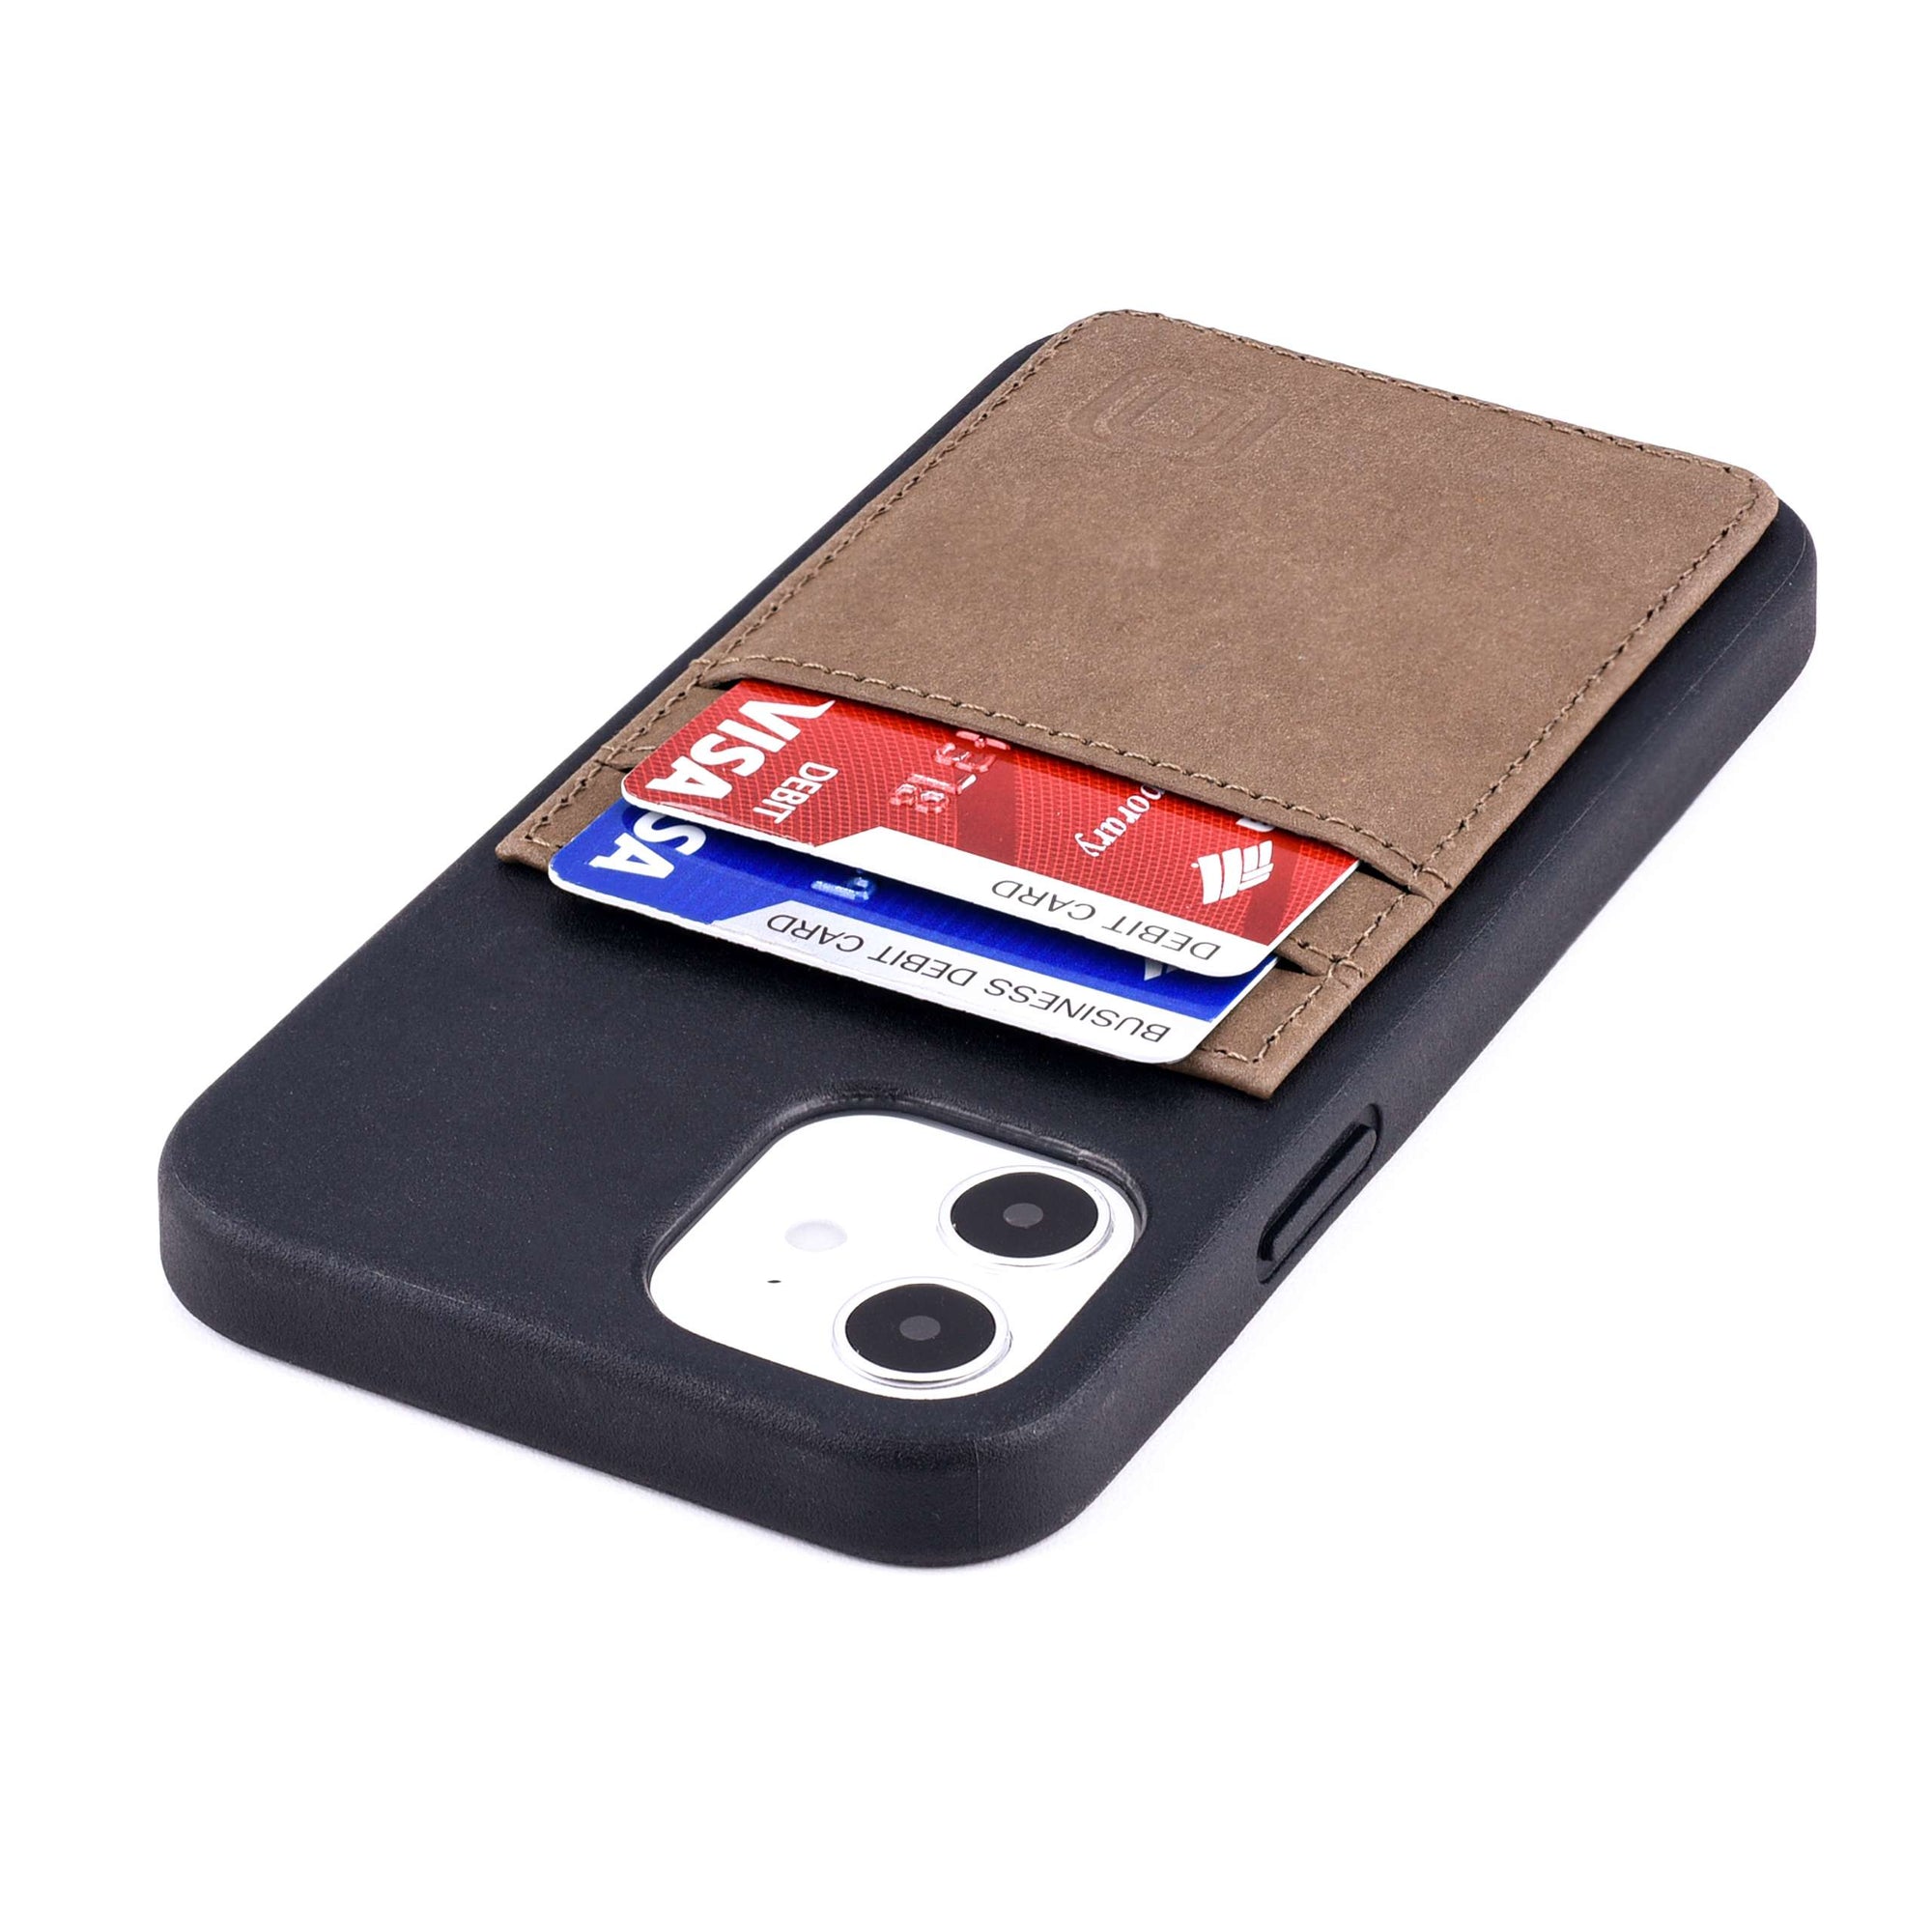 Decoded Detachable Wallet Case for iPhone 12/12 Pro - Brown